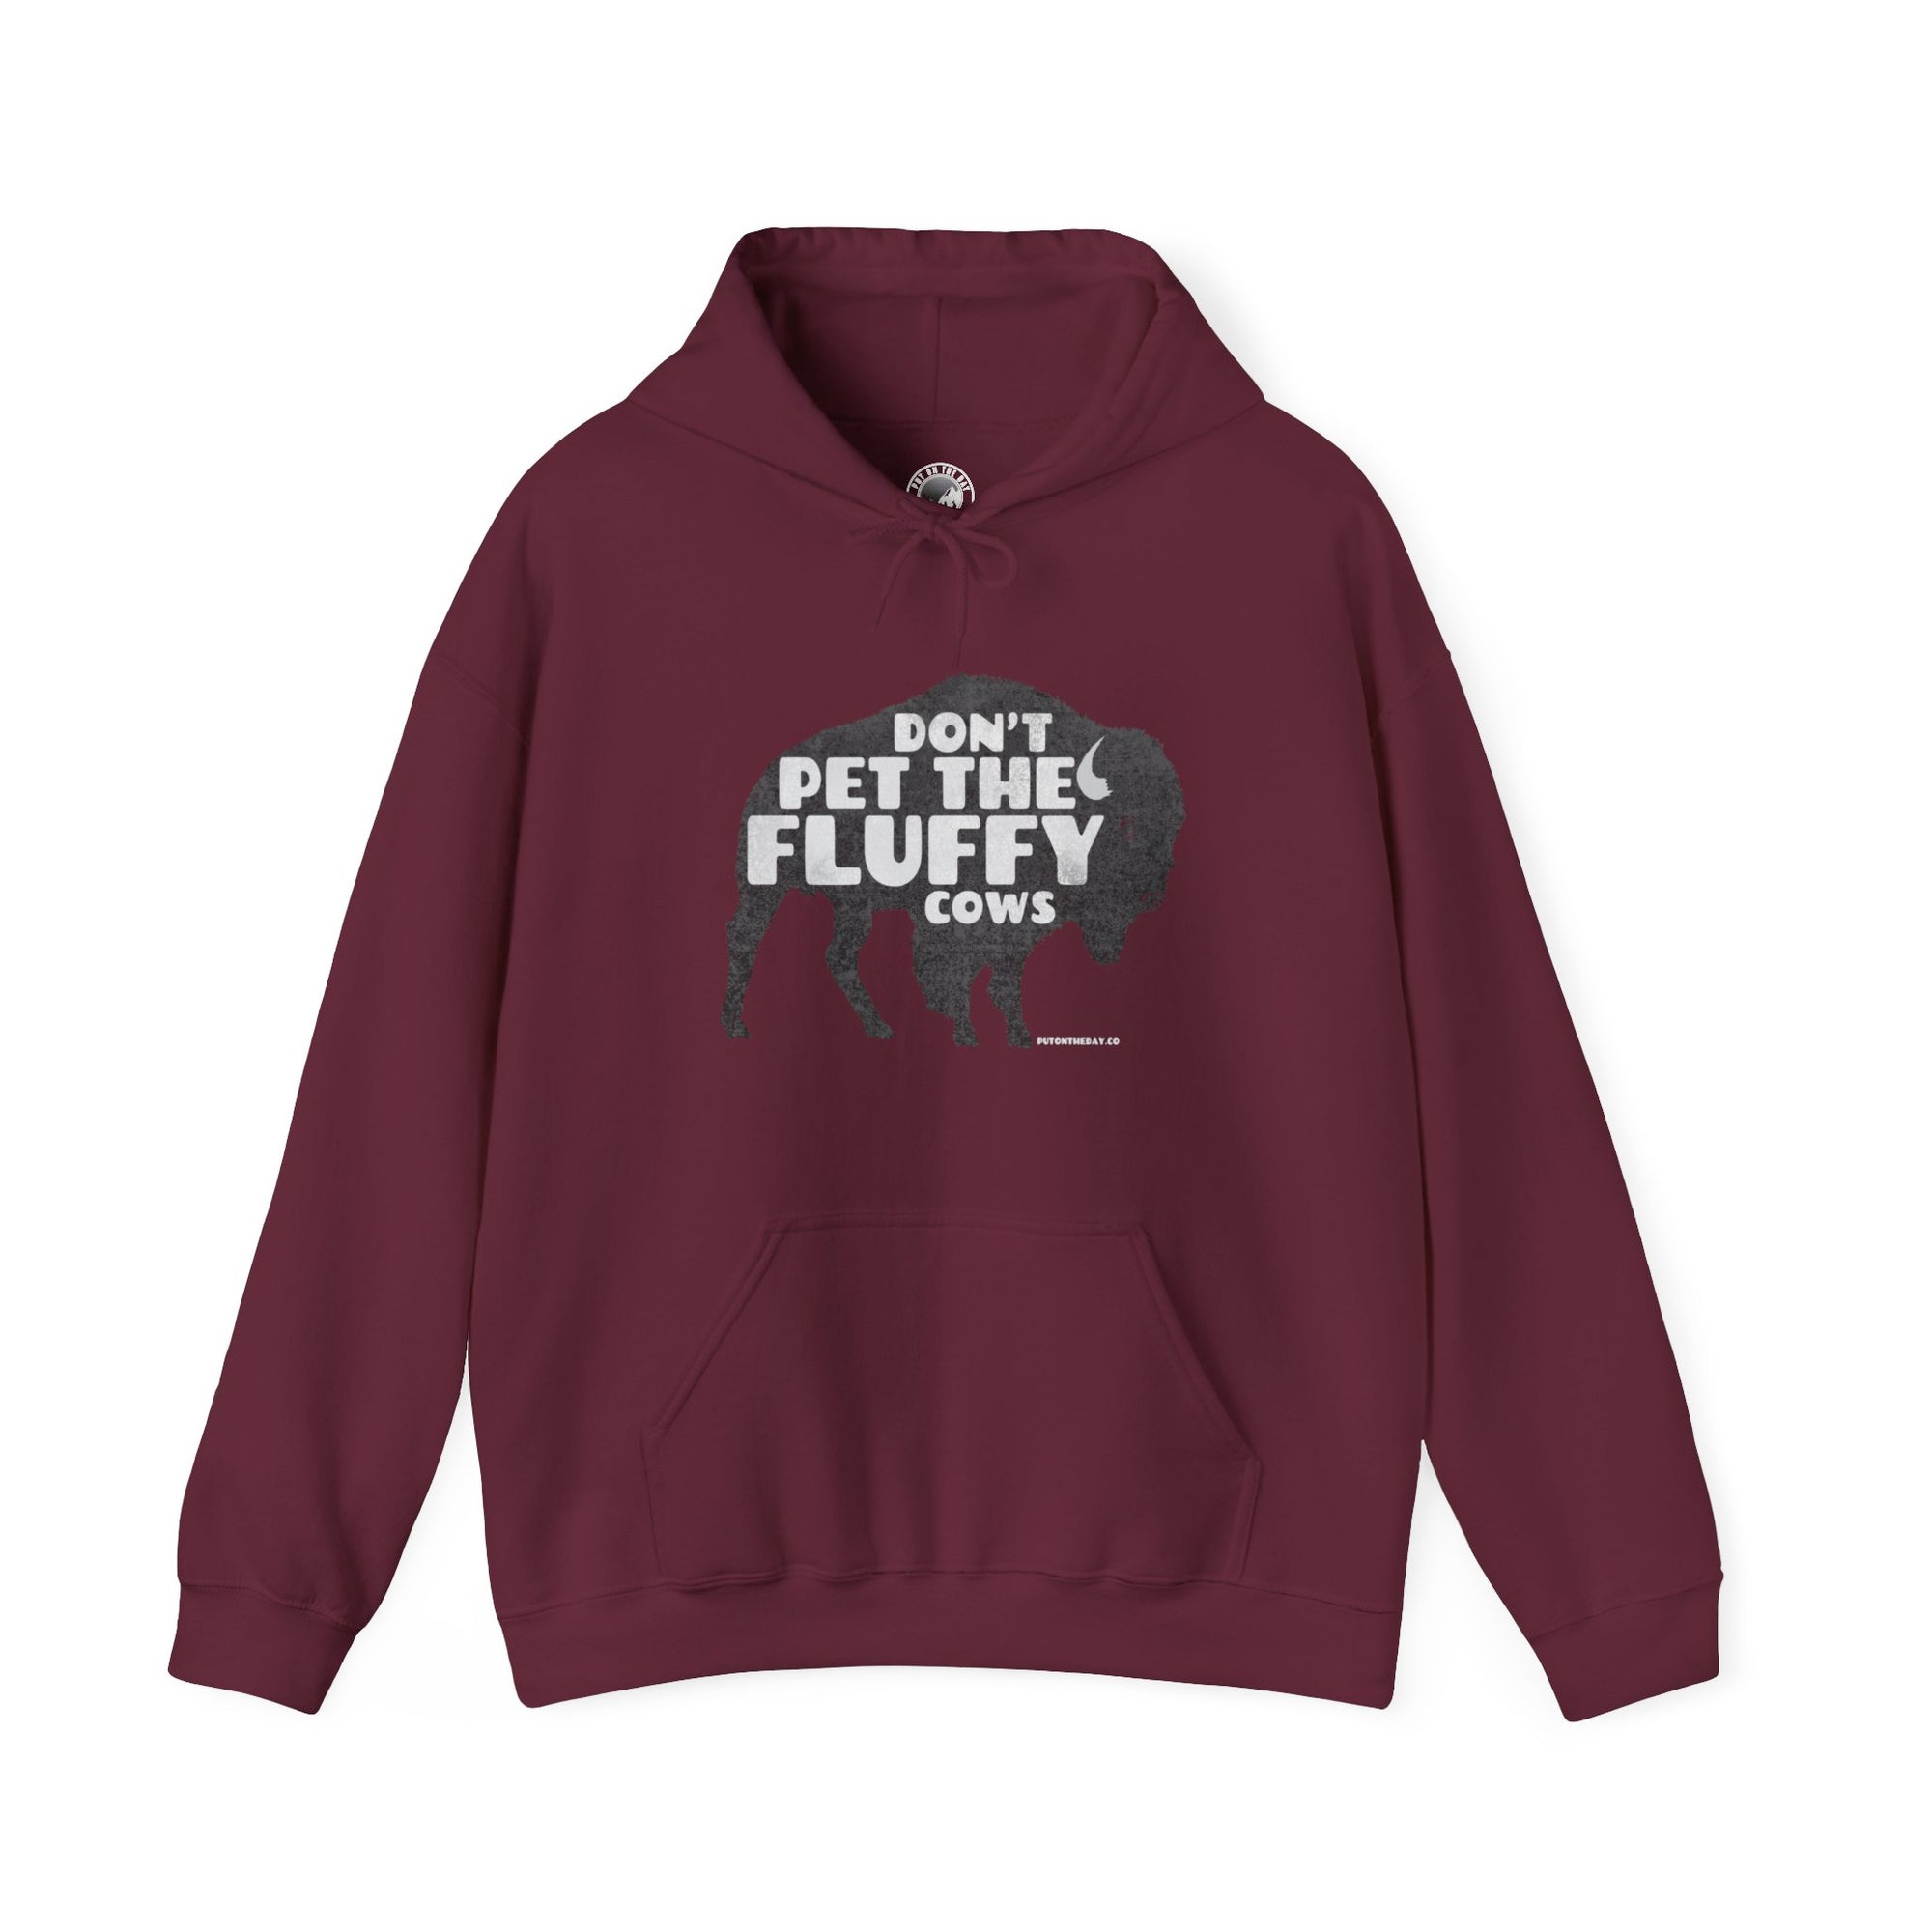 Don't pet the fluffy cows Hooded Sweatshirt